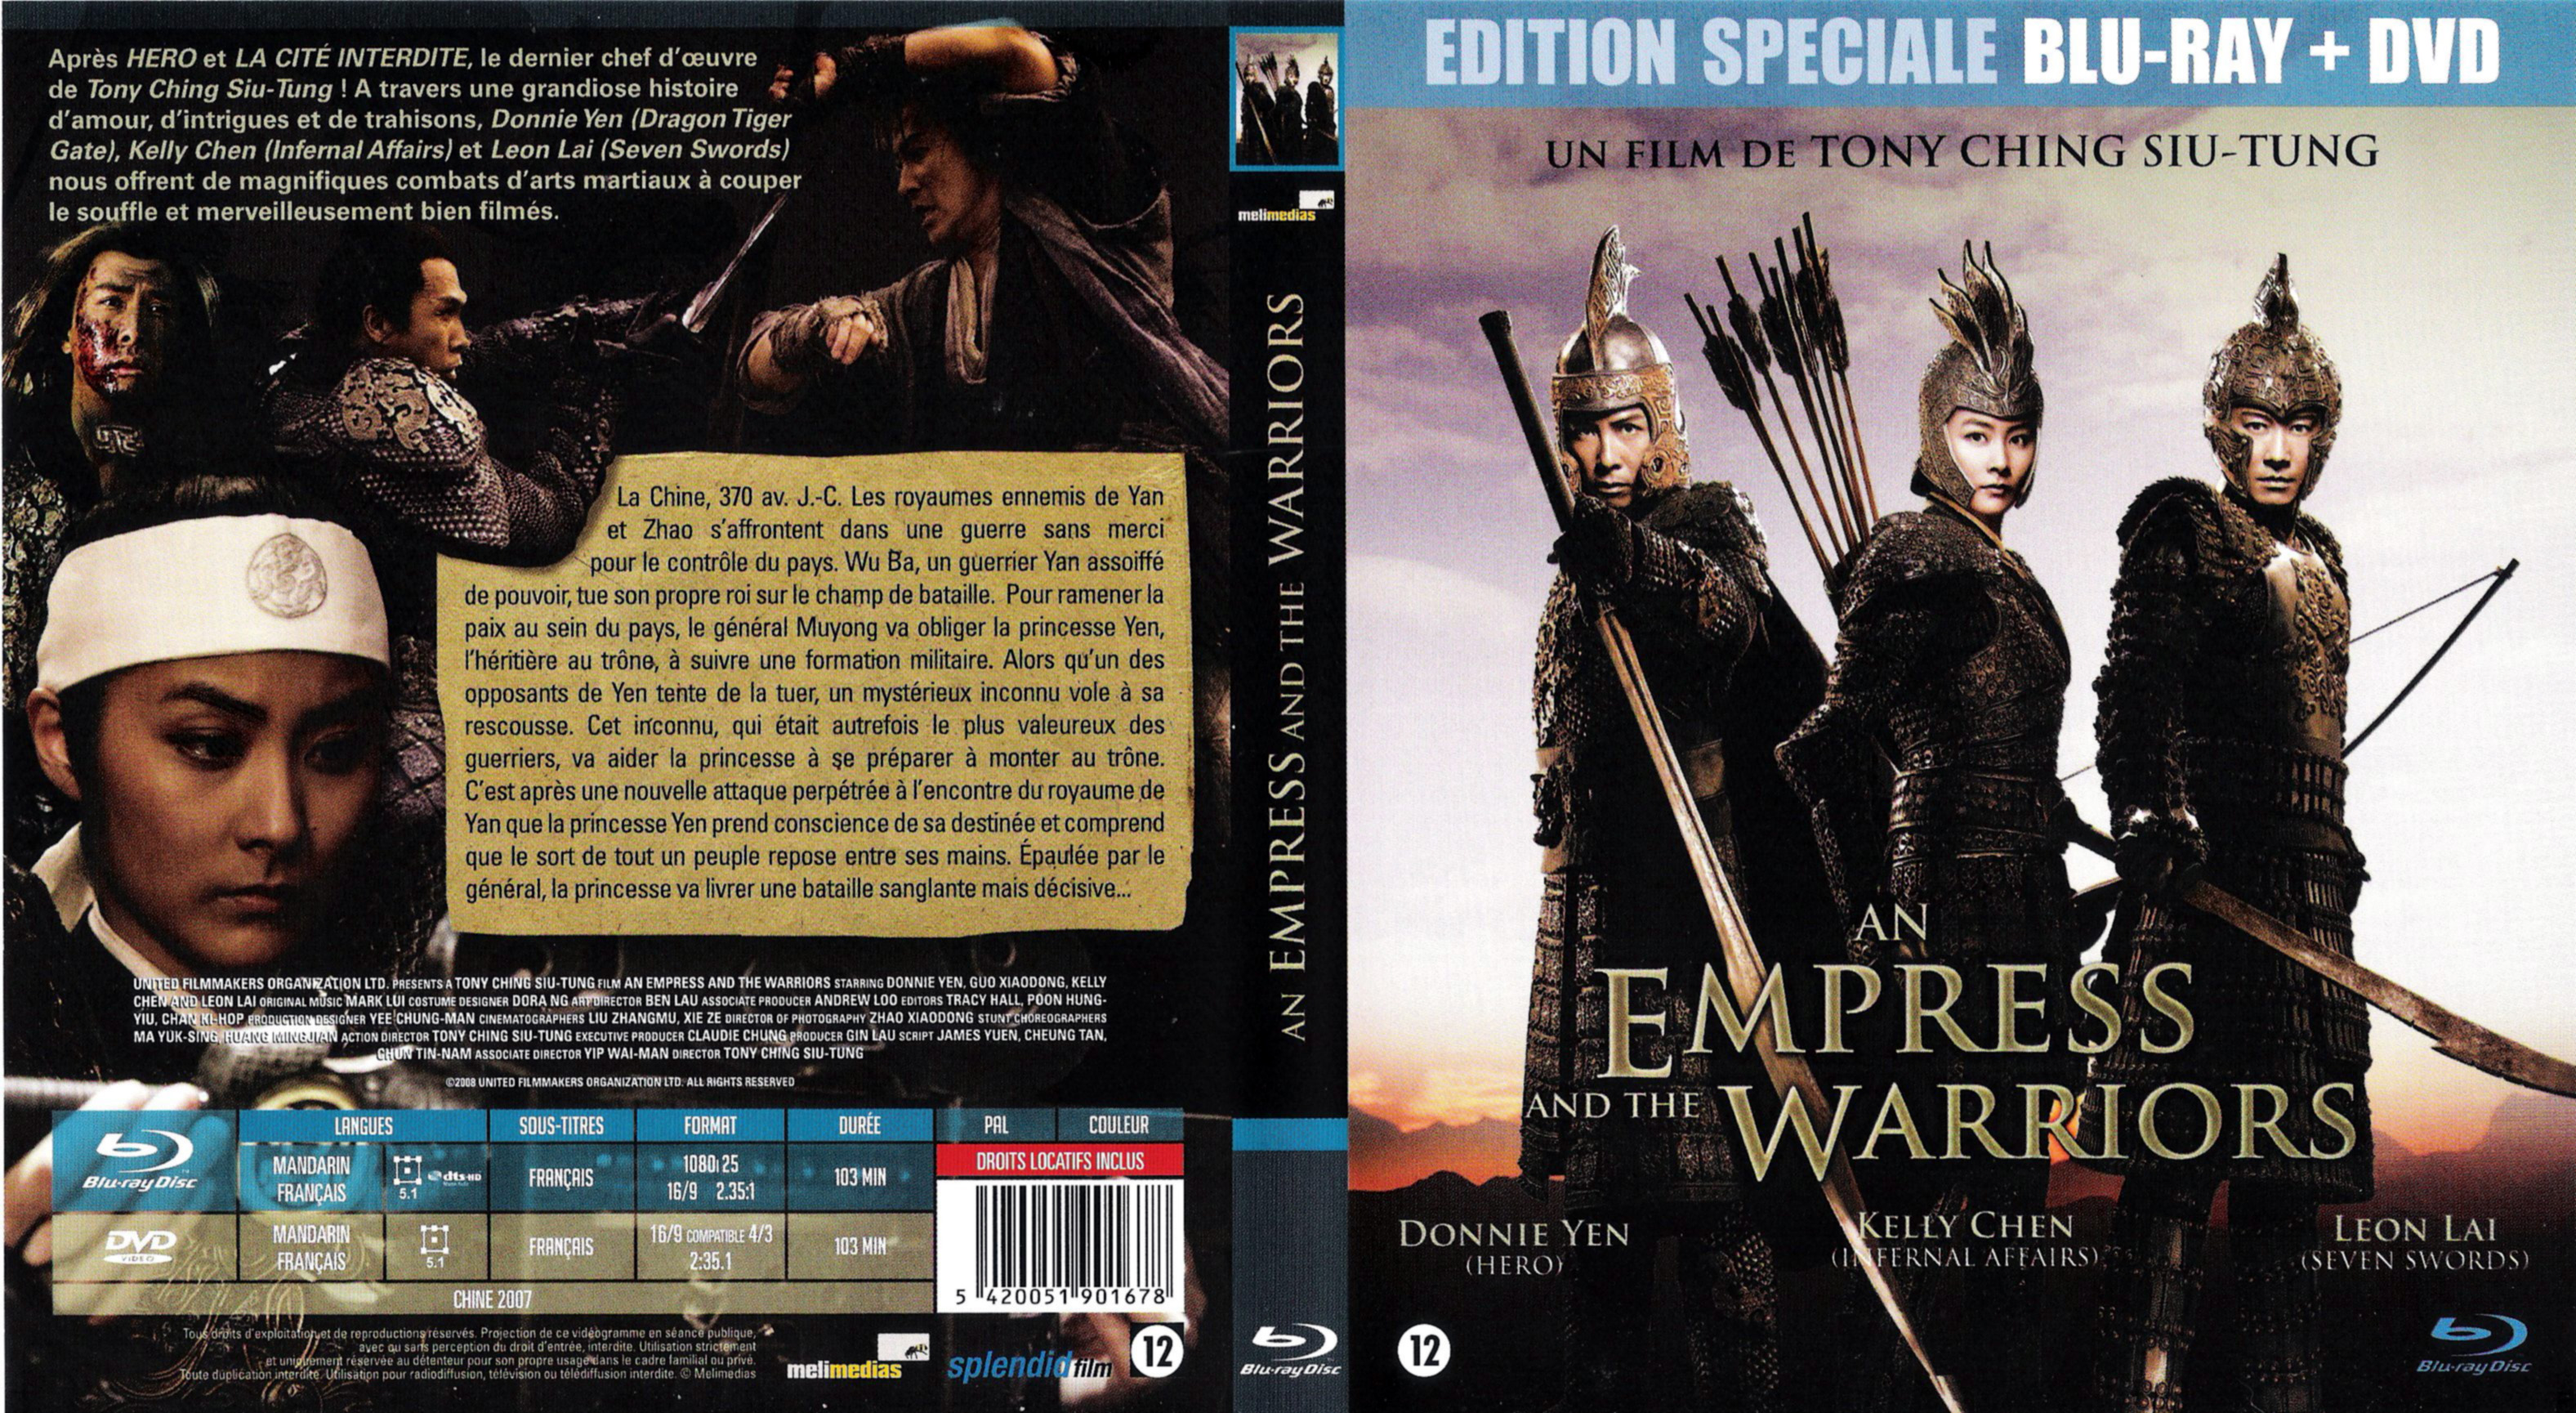 Jaquette DVD An empress and the warriors (BLU-RAY)